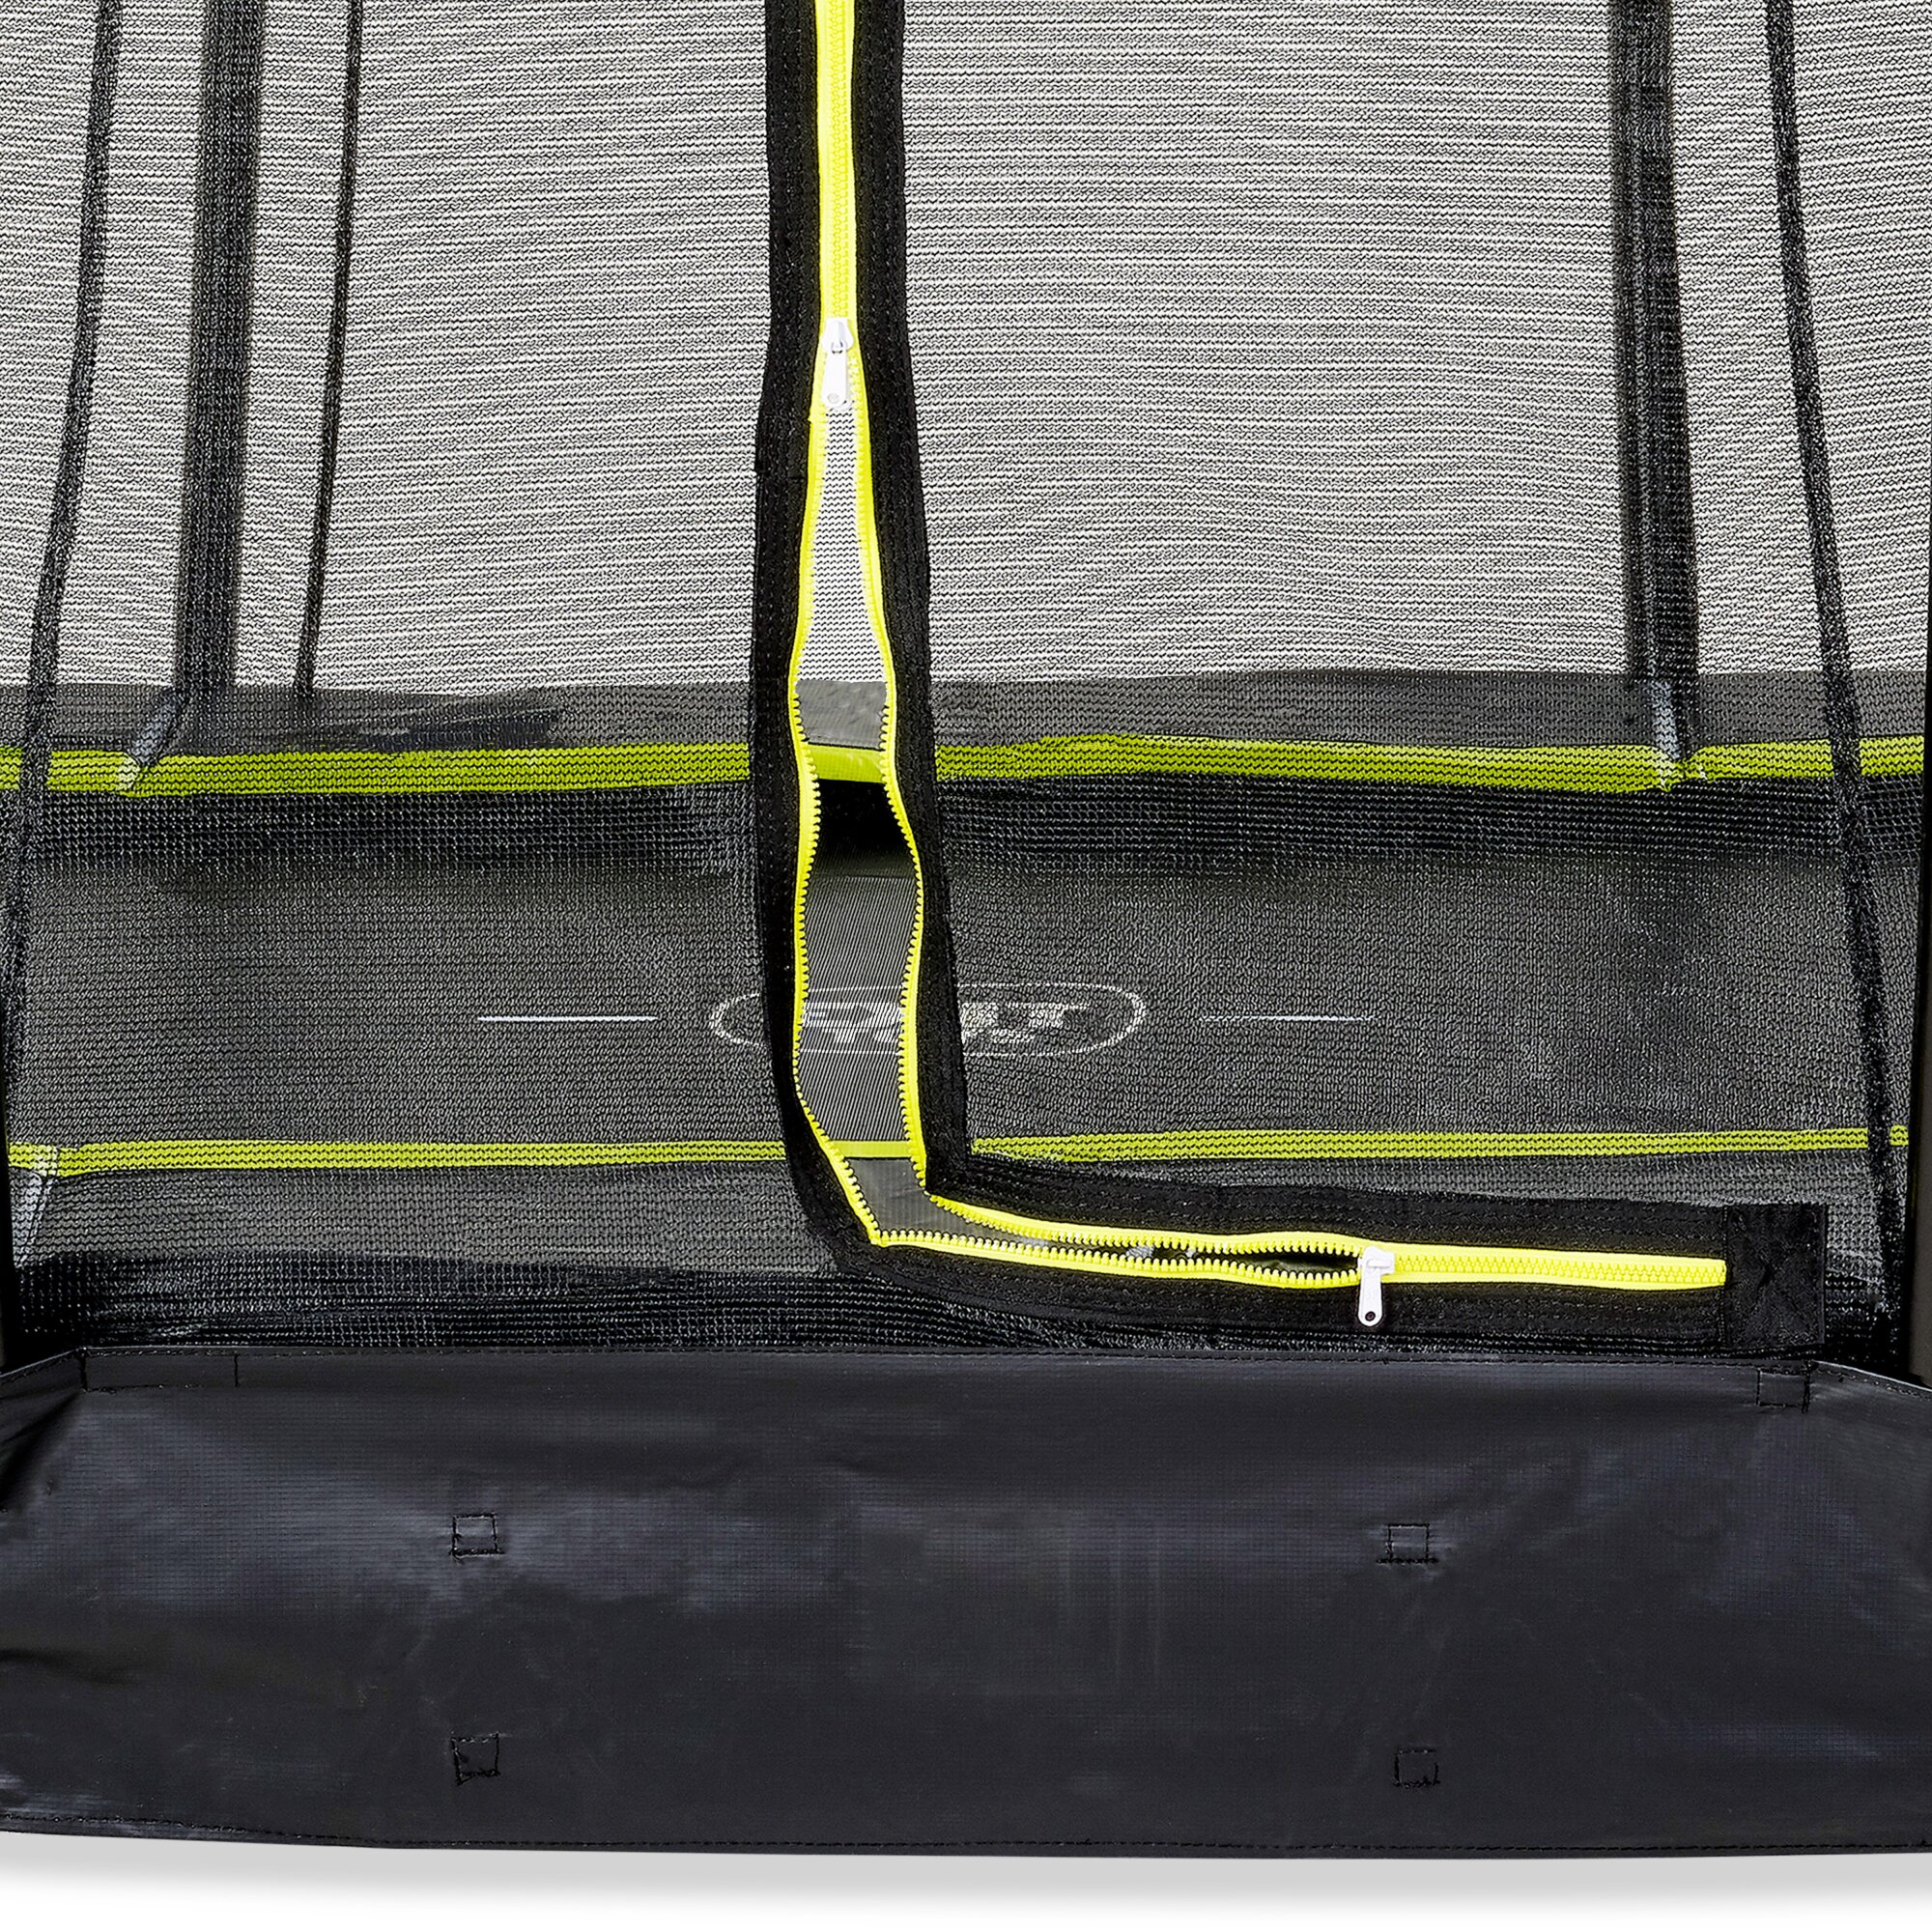 EXIT Silhouette ground trampoline 244x366cm with safety net - black